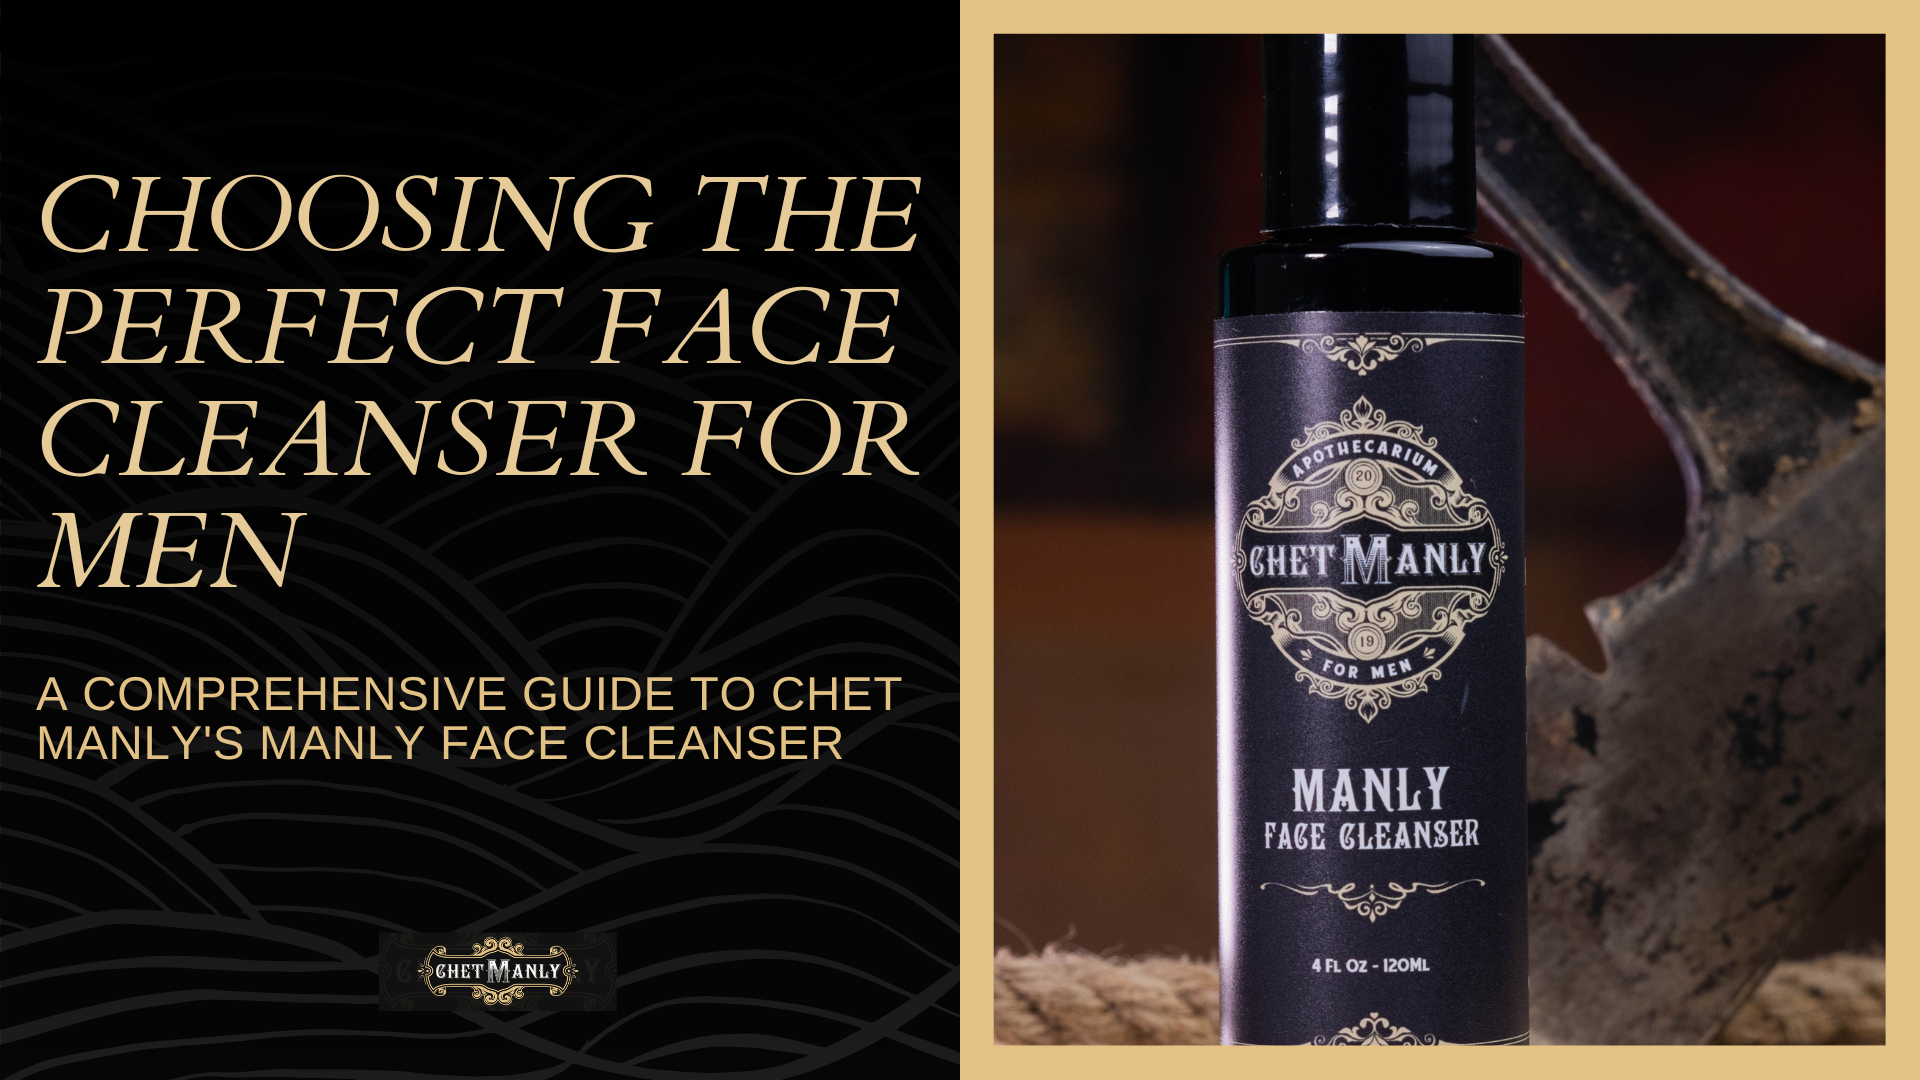 Choosing the Perfect Face Cleanser for Men: A Comprehensive Guide to Chet Manly's Manly Face Cleanser